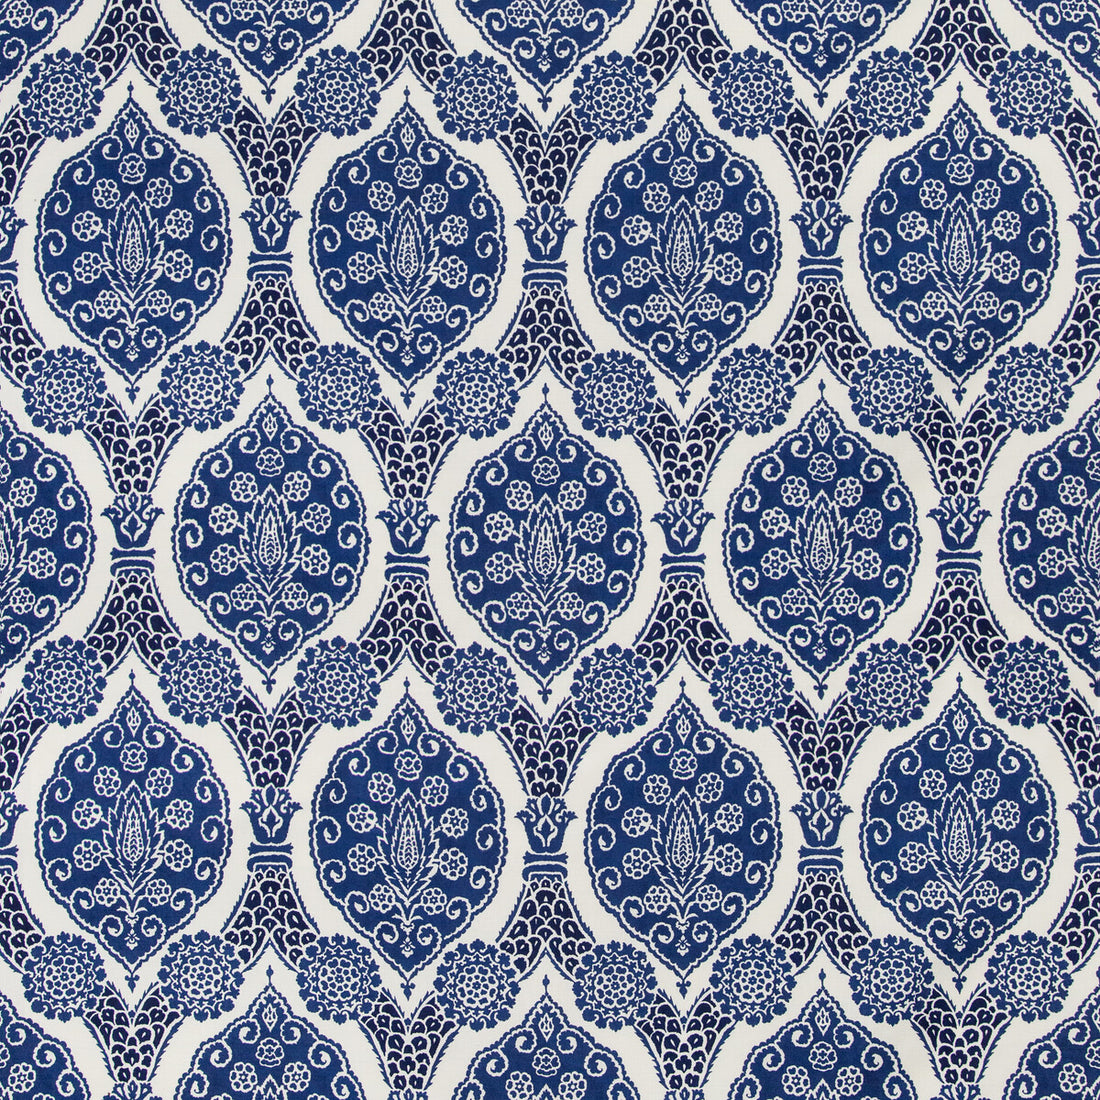 Sufera Print fabric in indigo color - pattern 8020103.50.0 - by Brunschwig &amp; Fils in the Grand Bazaar collection